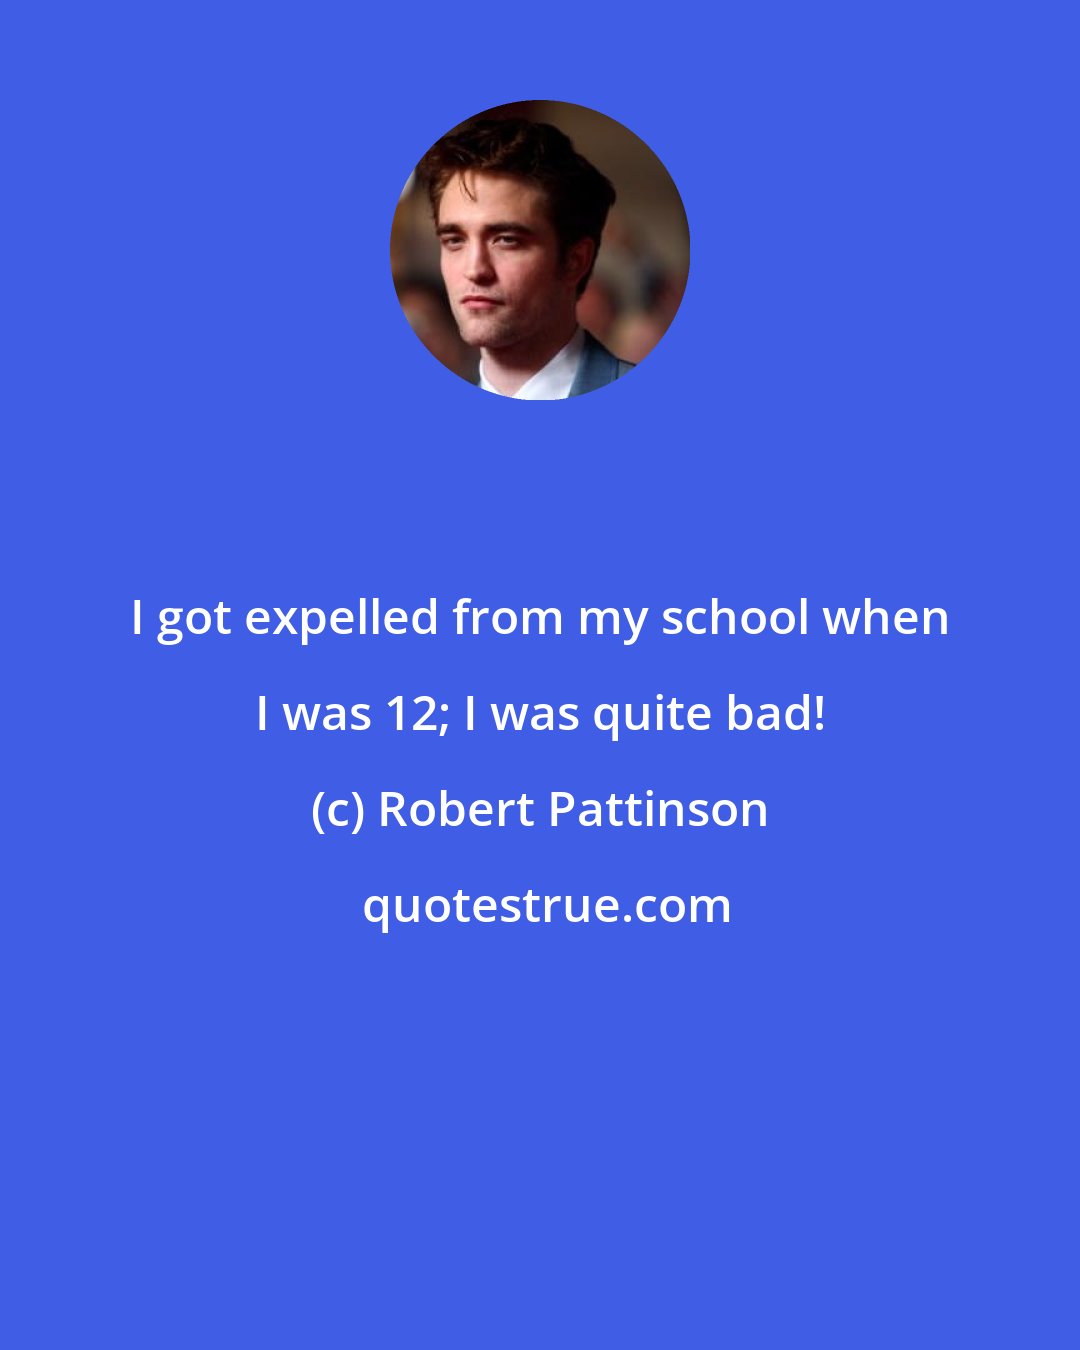 Robert Pattinson: I got expelled from my school when I was 12; I was quite bad!